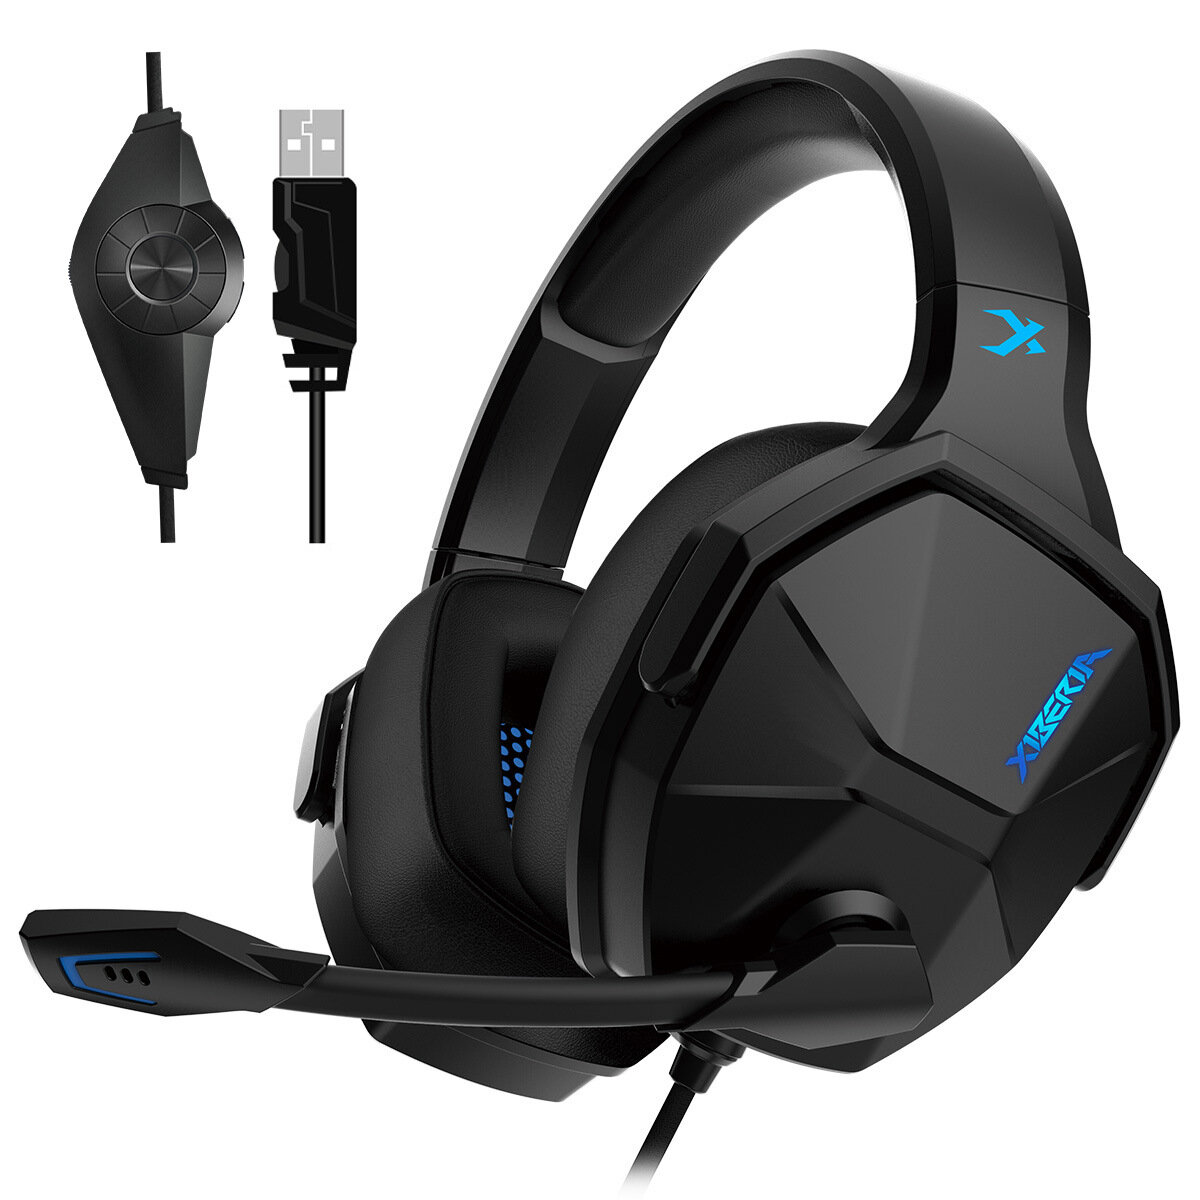 

XIBERIA V13 Gaming Headset USB 7.1 Channel Ergonomic Shaft Professional Headphone with Mic for Computer Laptop Gamer